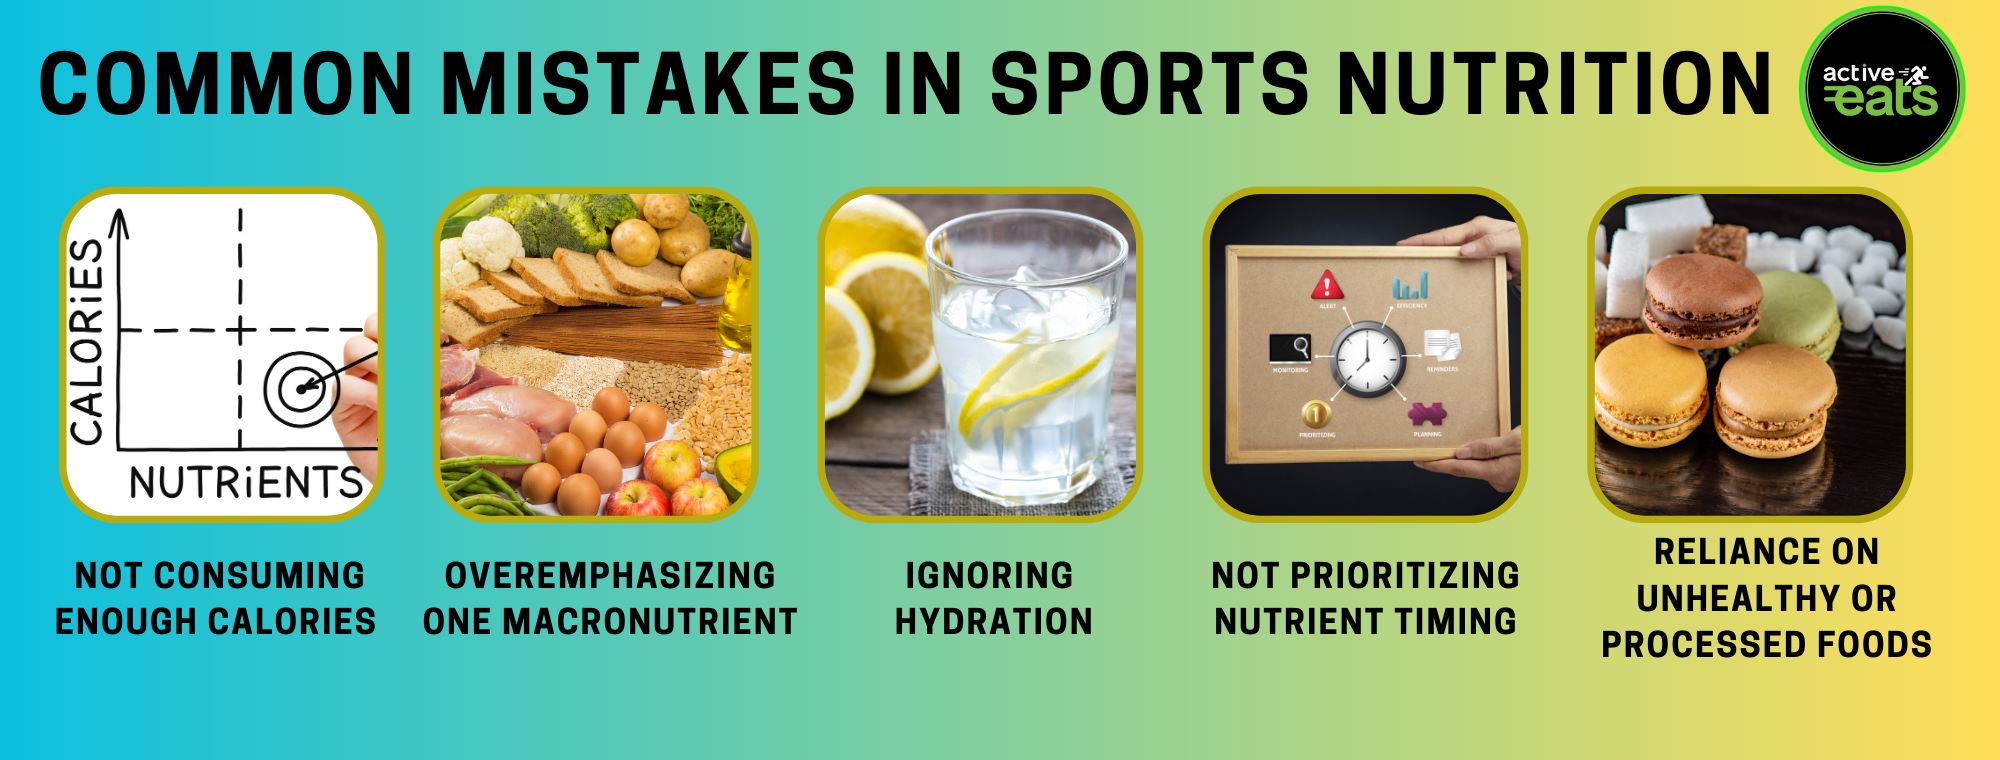 Image representing various mistakes people do in sports nutrition. 1.Not consuming enough calories 2. Overemphasizing just one or two macronutrients 3. Ignoring Hydration 4. Not prioritizing nutrient timings 5. reliance on unhealthy or processed foods